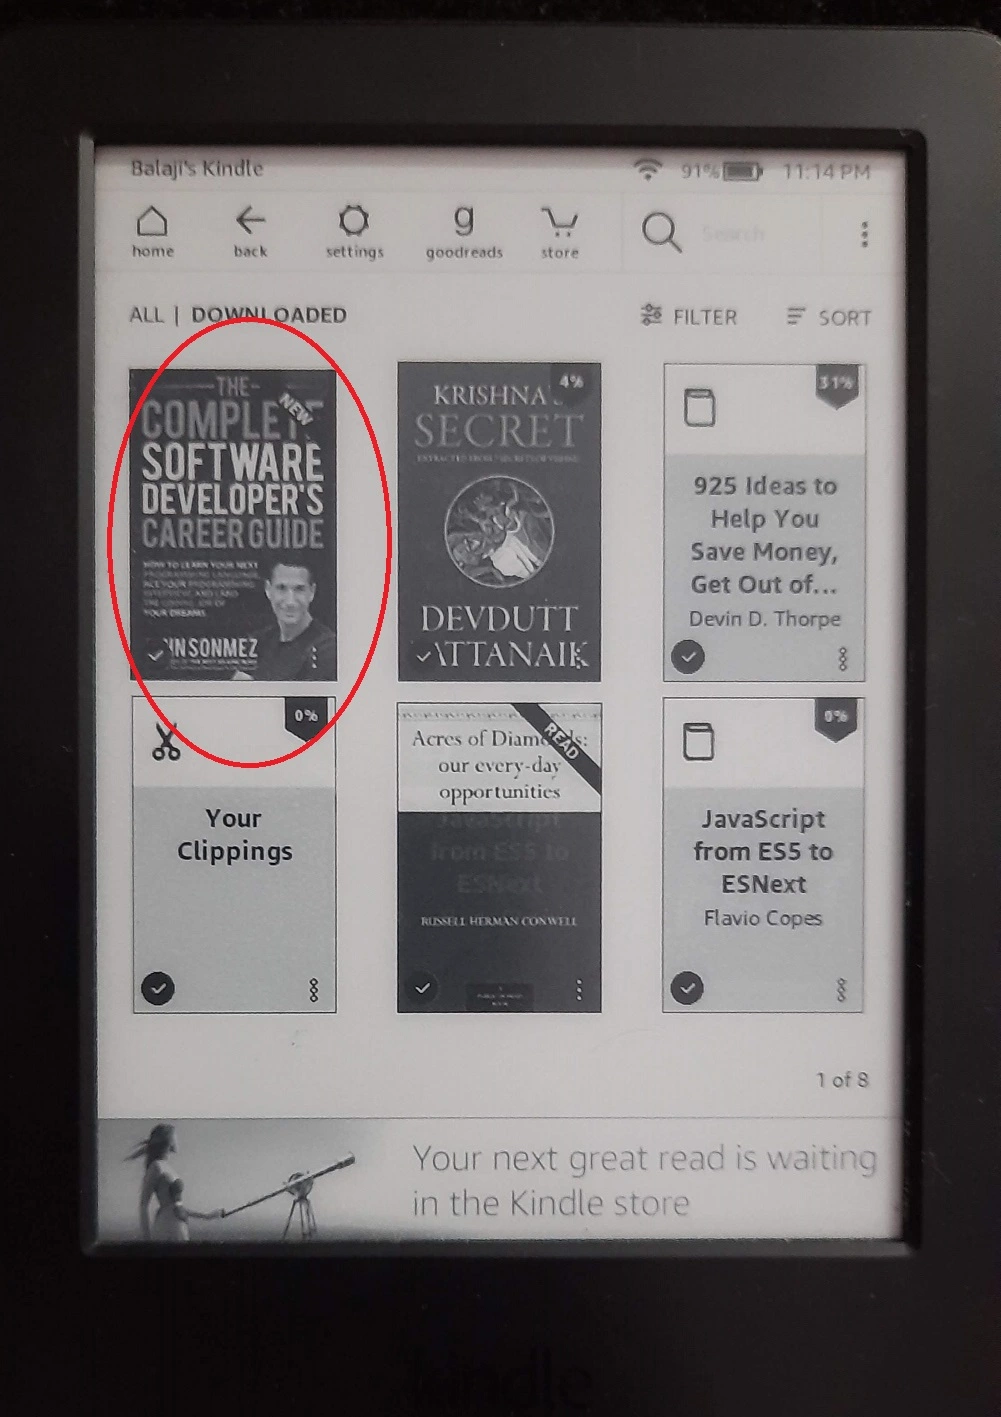 book has synced 